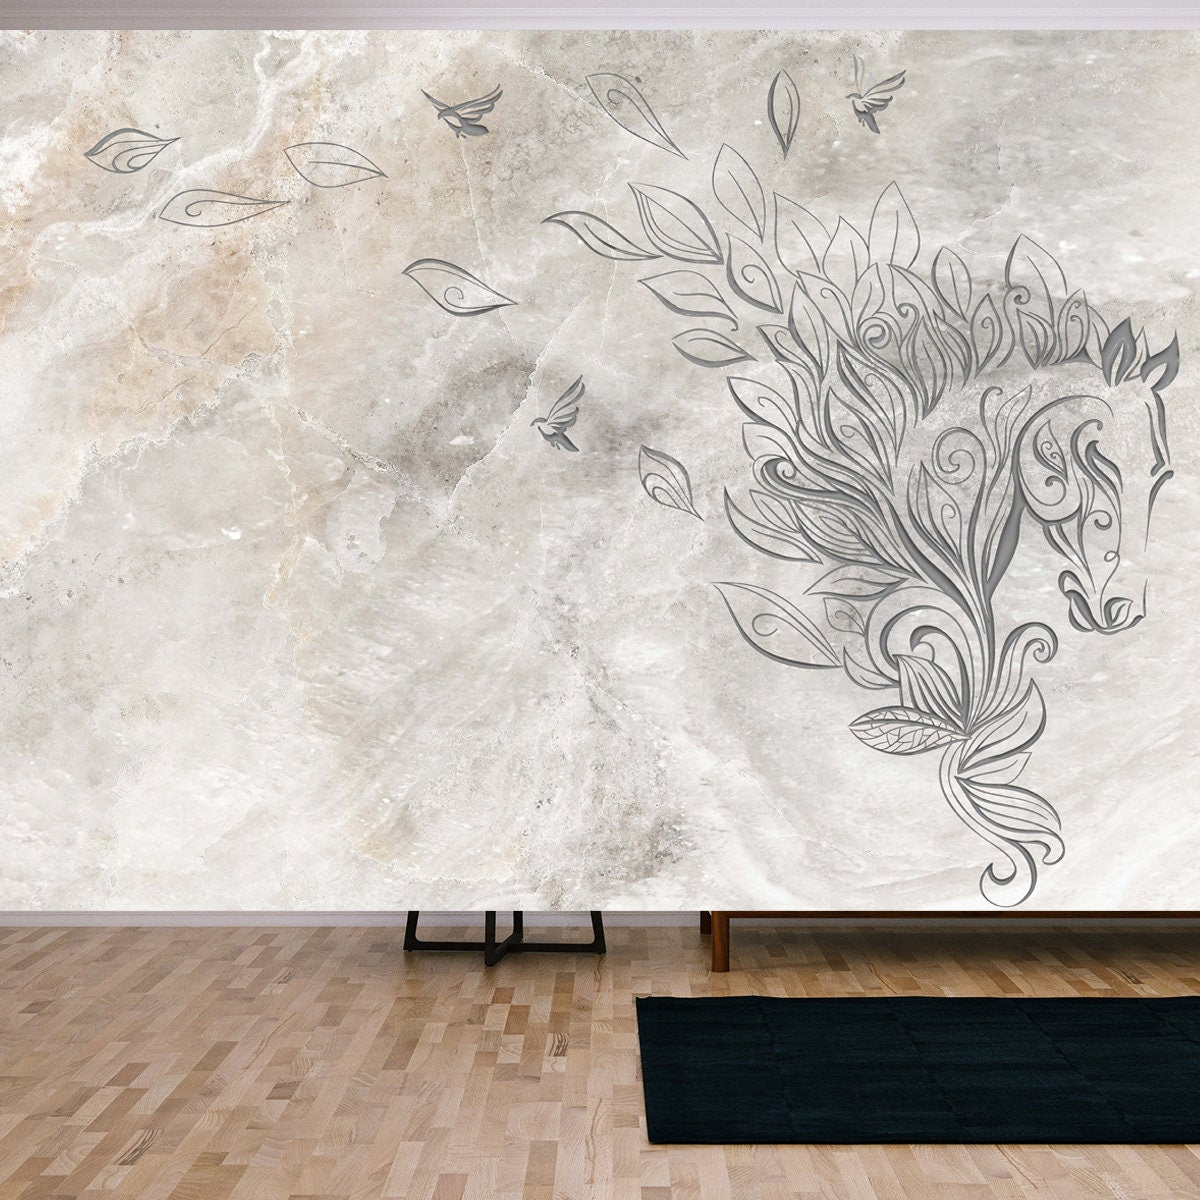 High Quality Porcelain or Marble Panel Tile with Carved Foliage Horse Wallpaper Living Room Mural